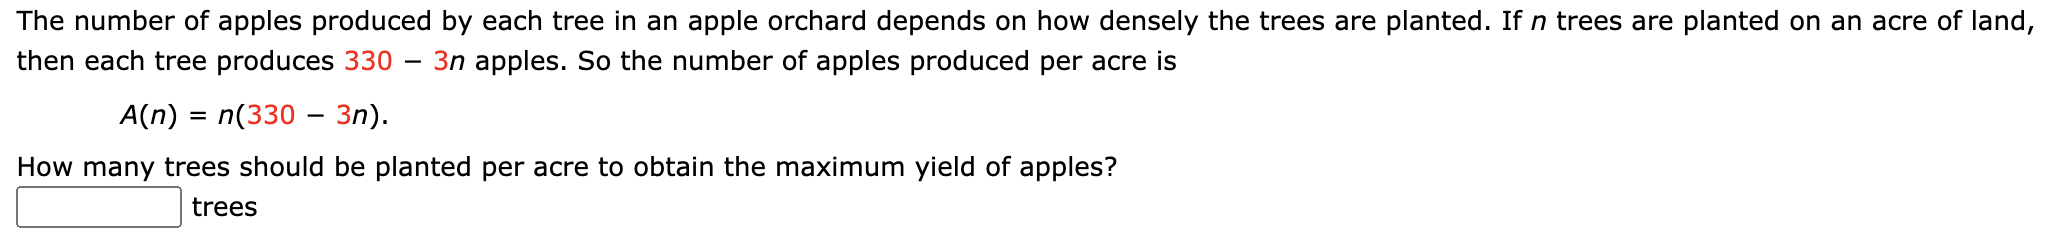 The number of apples produced by each tree in an apple orchard depends on how densely the trees are planted. If n trees are planted on an acre of land,
then each tree produces 330
3n apples. So the number of apples produced per acre is
|
A(n) = n(330 – 3n).
How many trees should be planted per acre to obtain the maximum yield of apples?
trees
